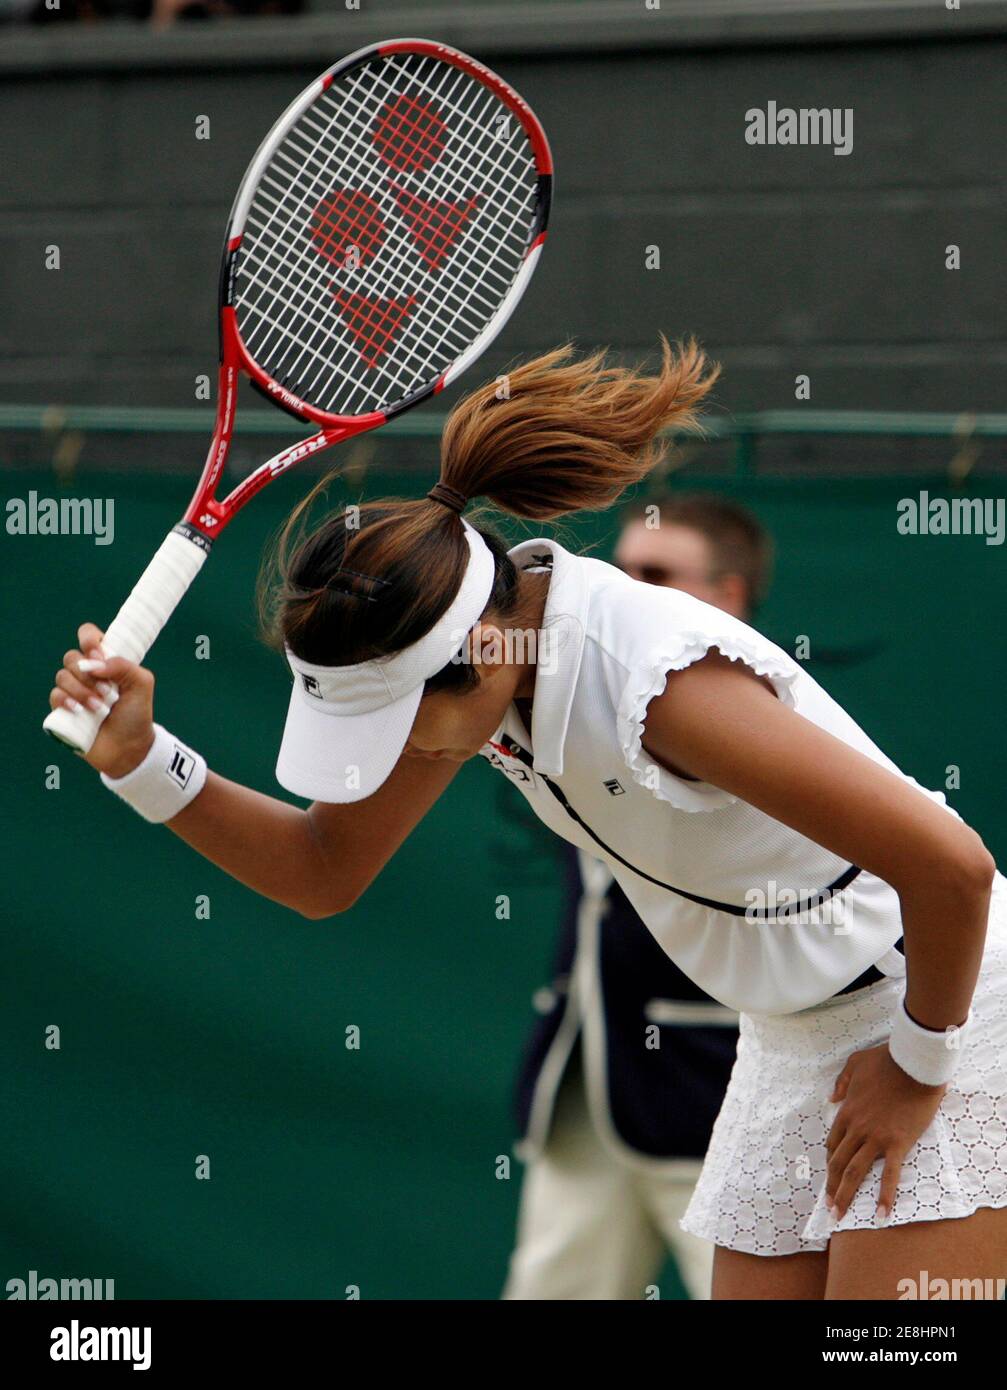 Japan's Akiko Morigami reacts during her singles match against Venus Williams of the U.S. at the Wimbledon tennis championships in London, July 2, 2007.     REUTERS/Alessia Pierdomenico (BRITAIN) Stock Photo